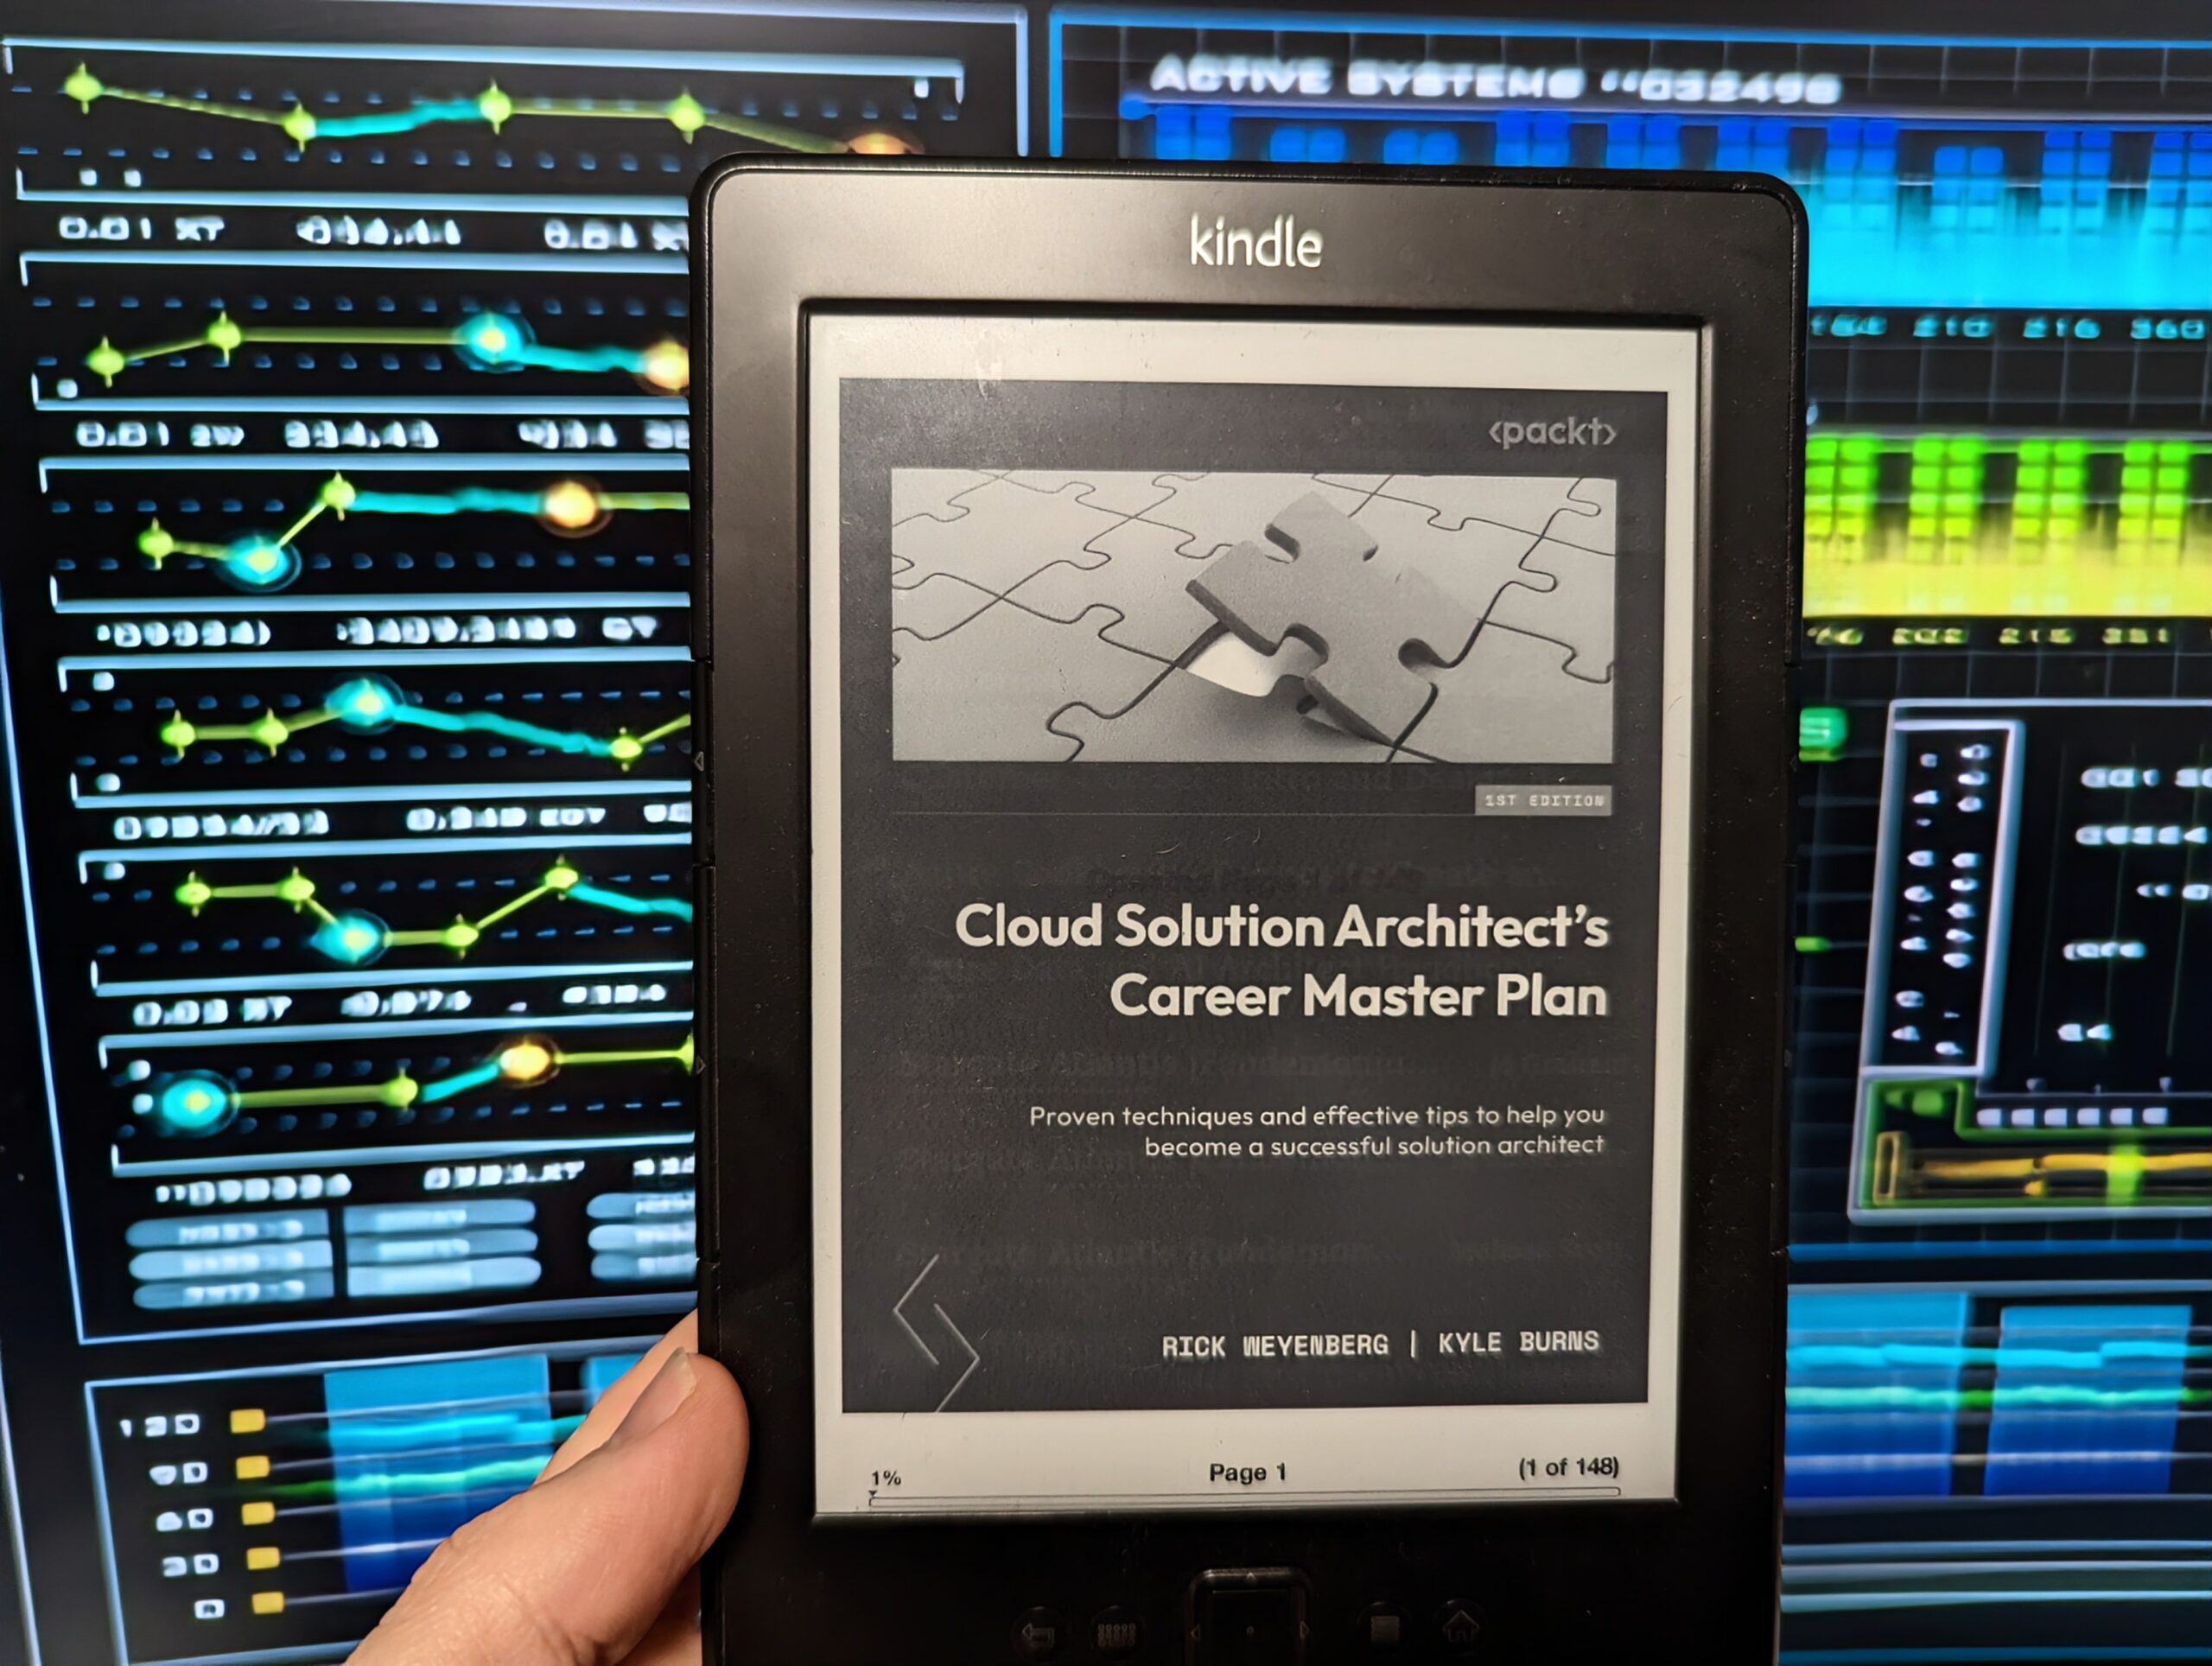 Cloud Solution Architect's Career Master Plan